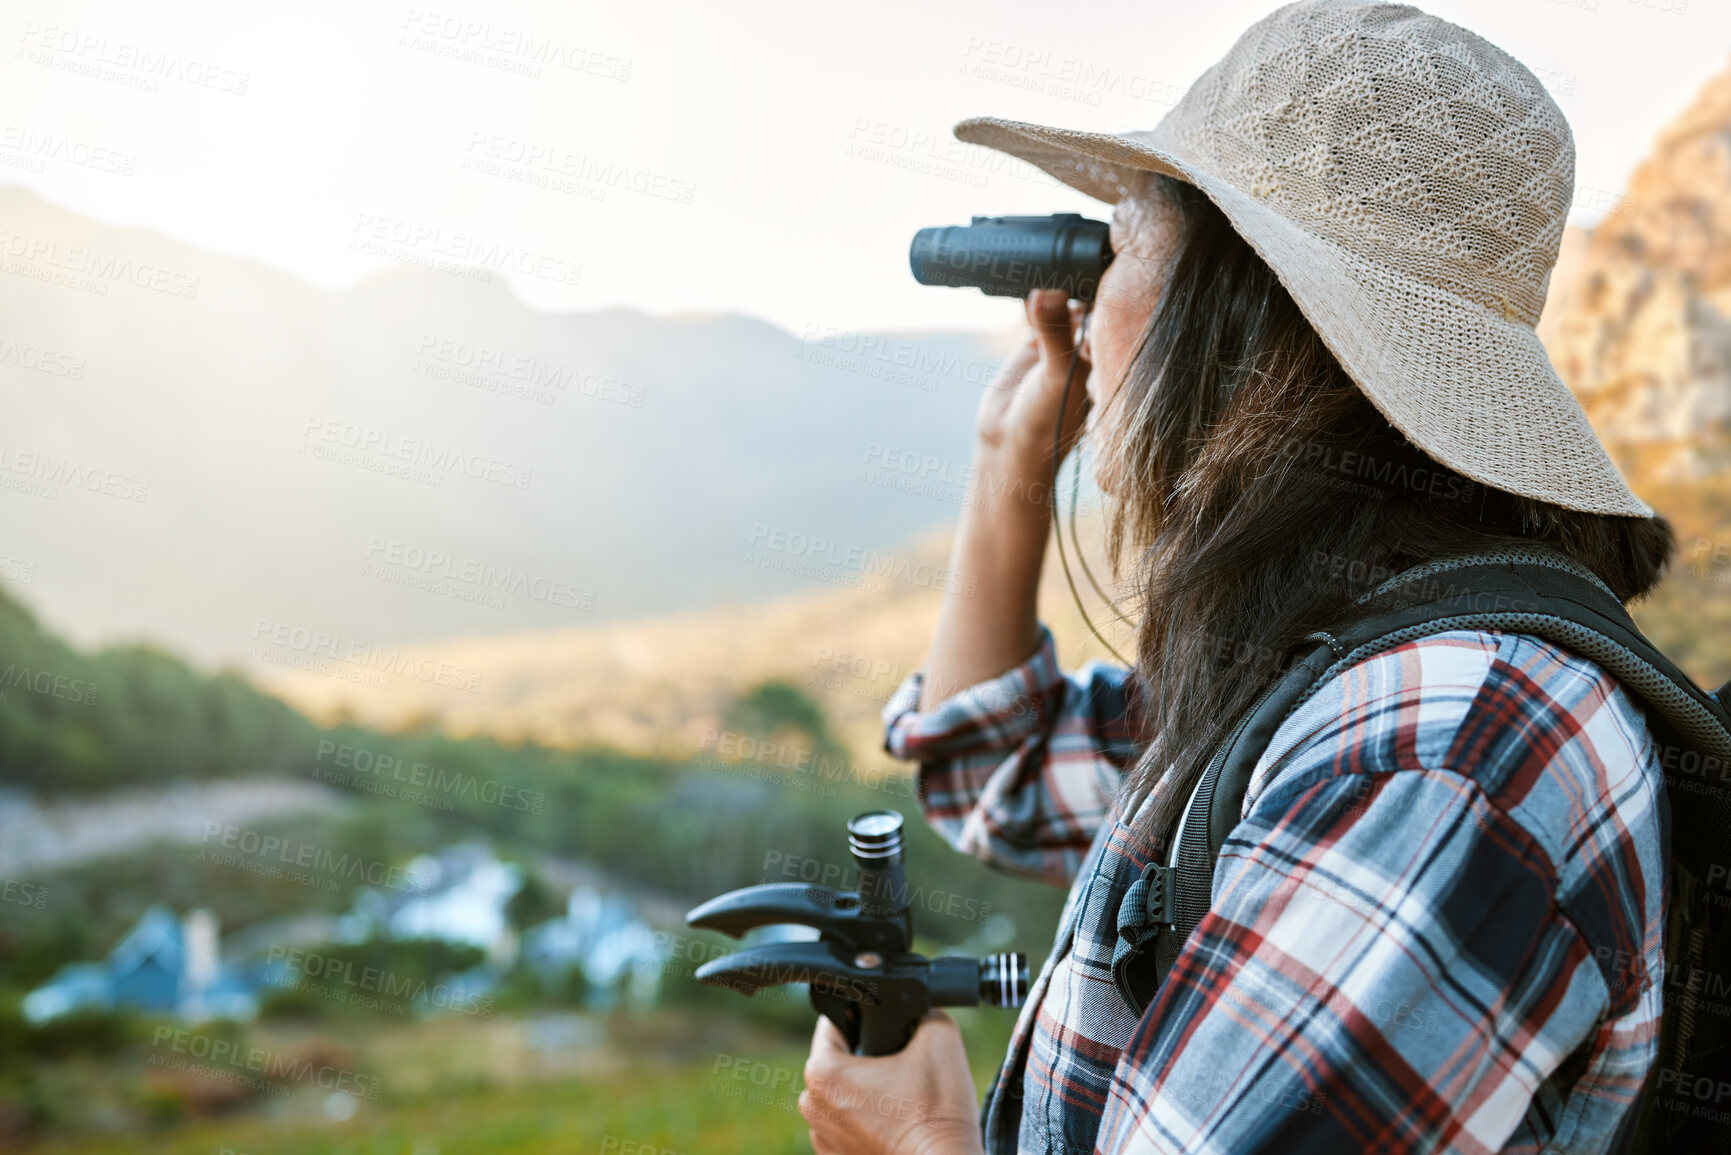 Buy stock photo Hiking, exploration and mountain adventure with binoculars, trekking pole and walking aid in a remote landscape with view. Mature woman, hiker and tourist watching birdlife or wildlife in eco nature